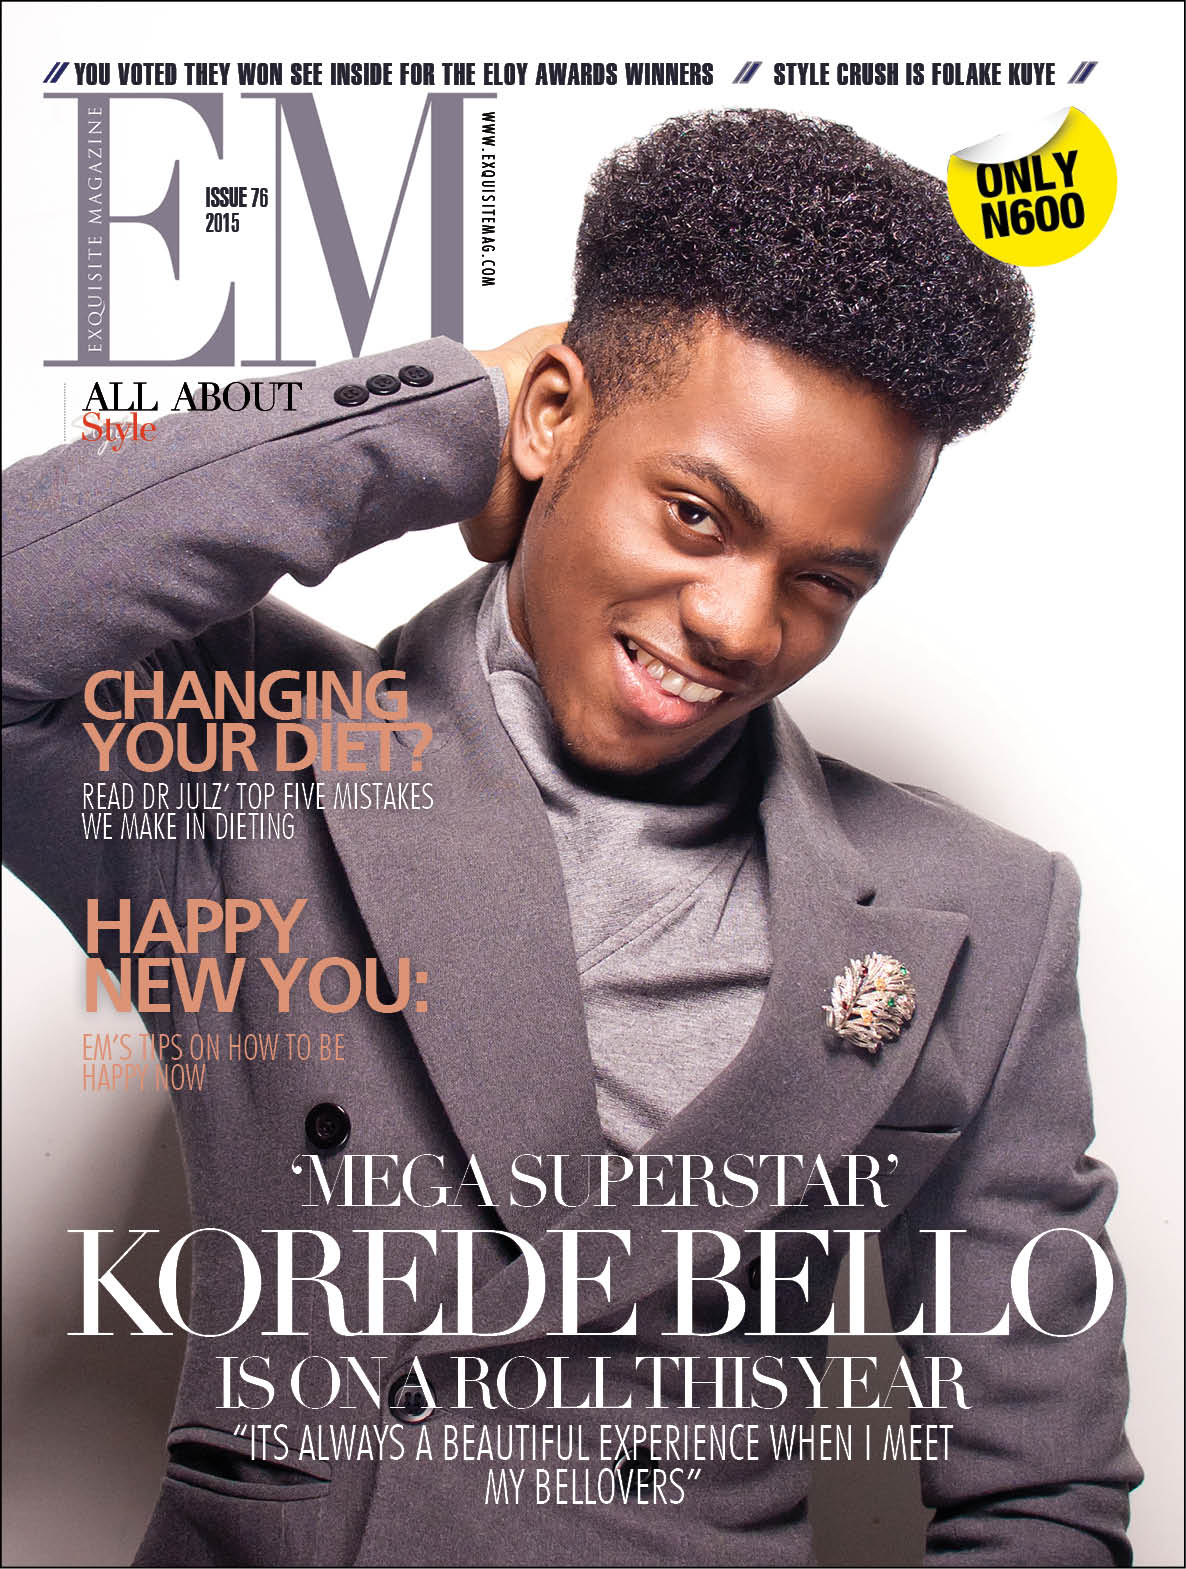 I sang my first hit at 16, Korede Bello is 28 years old and still my boy' -  Dammy Krane